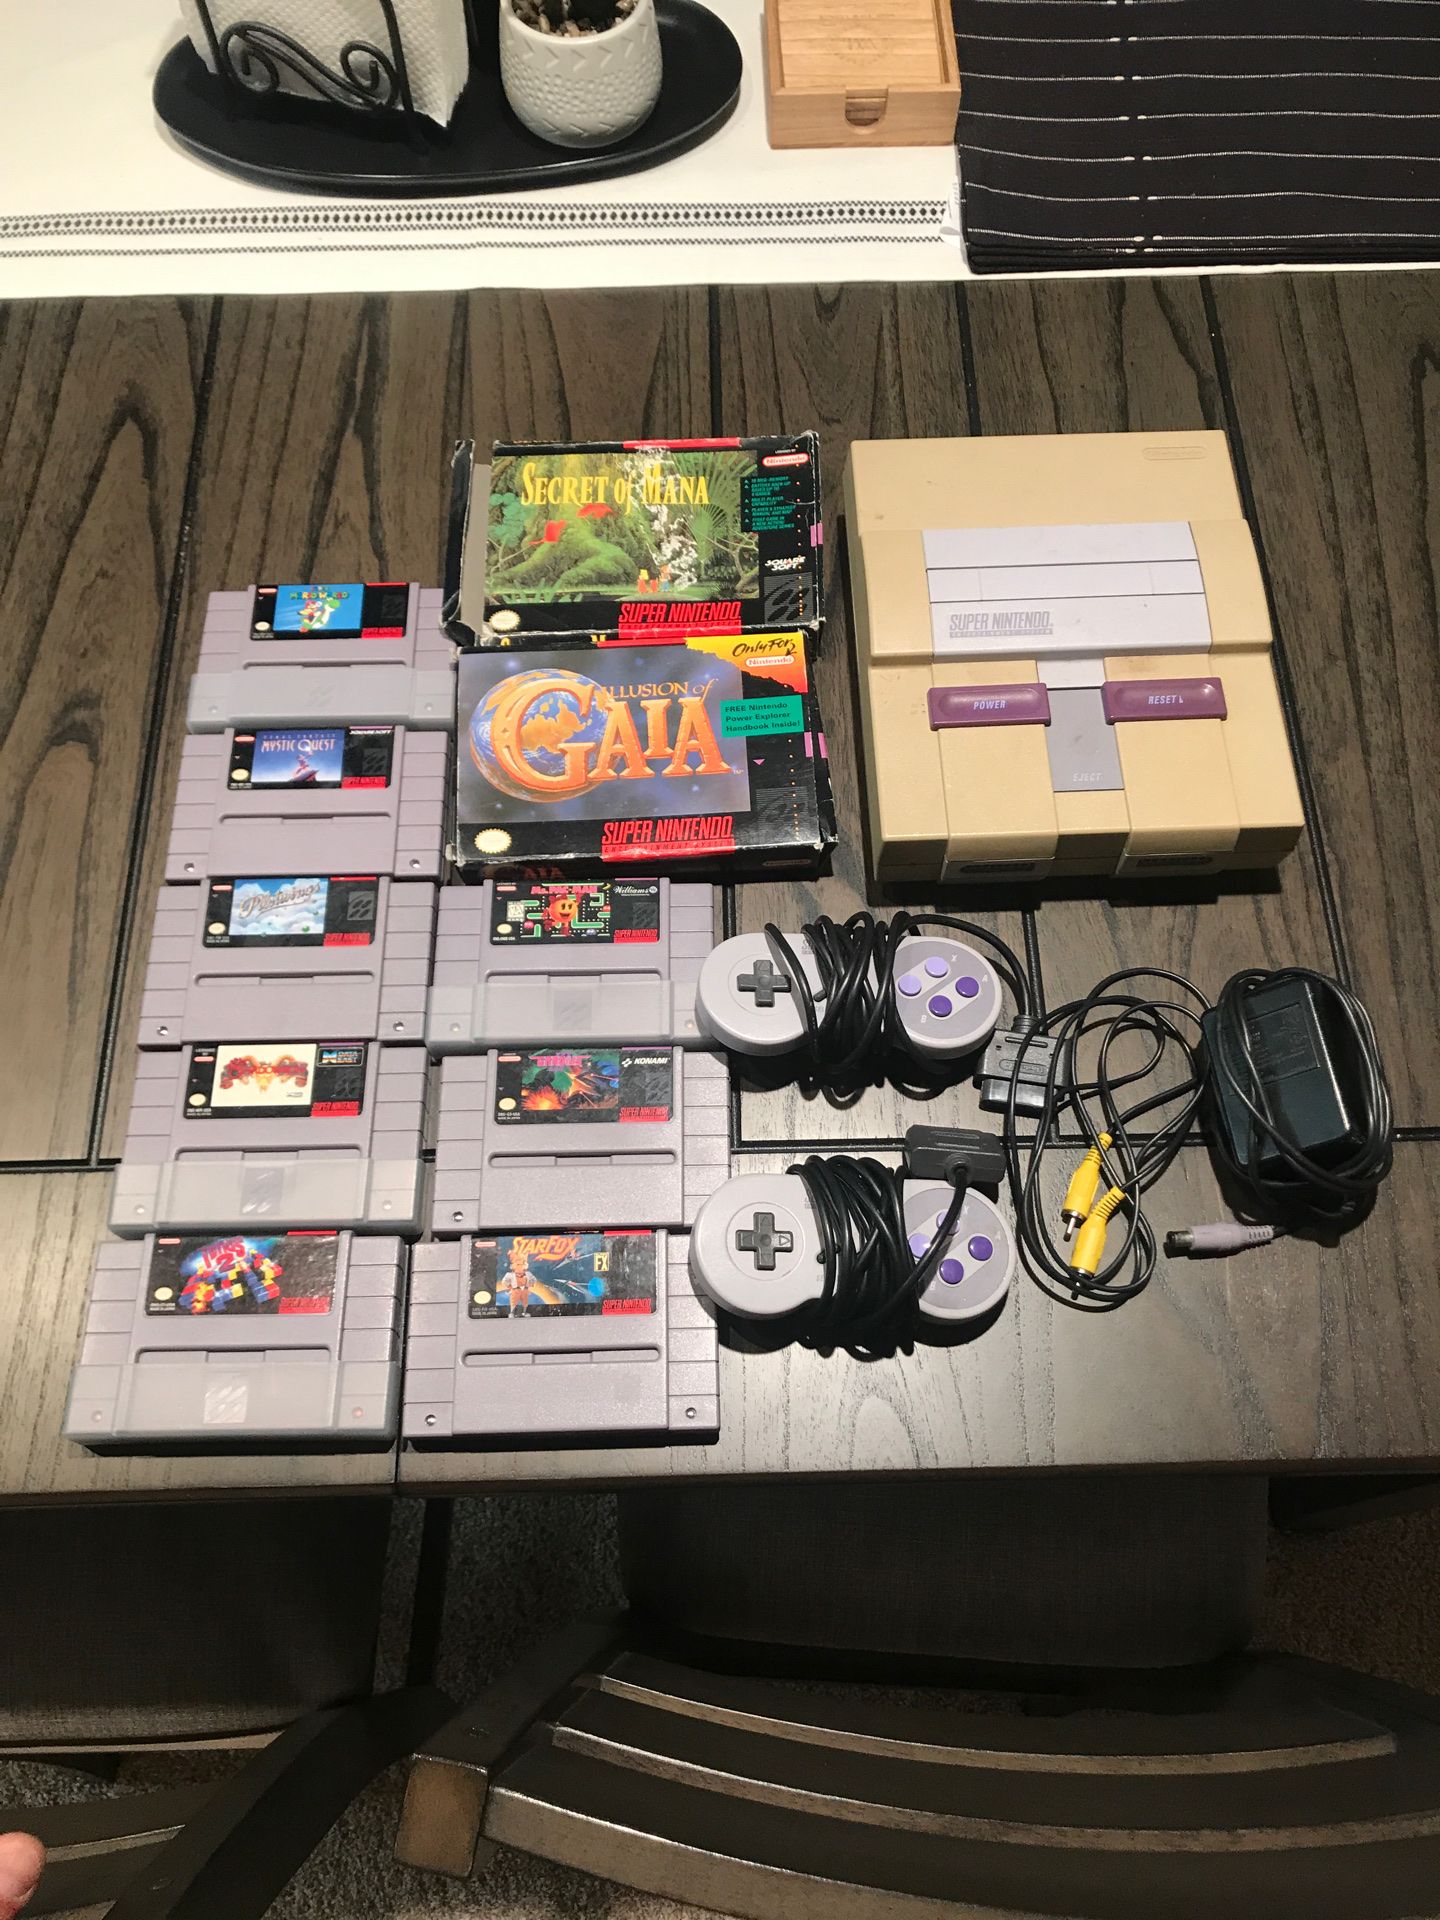 Super Nintendo with two controllers and 10 games. Missing AV cord